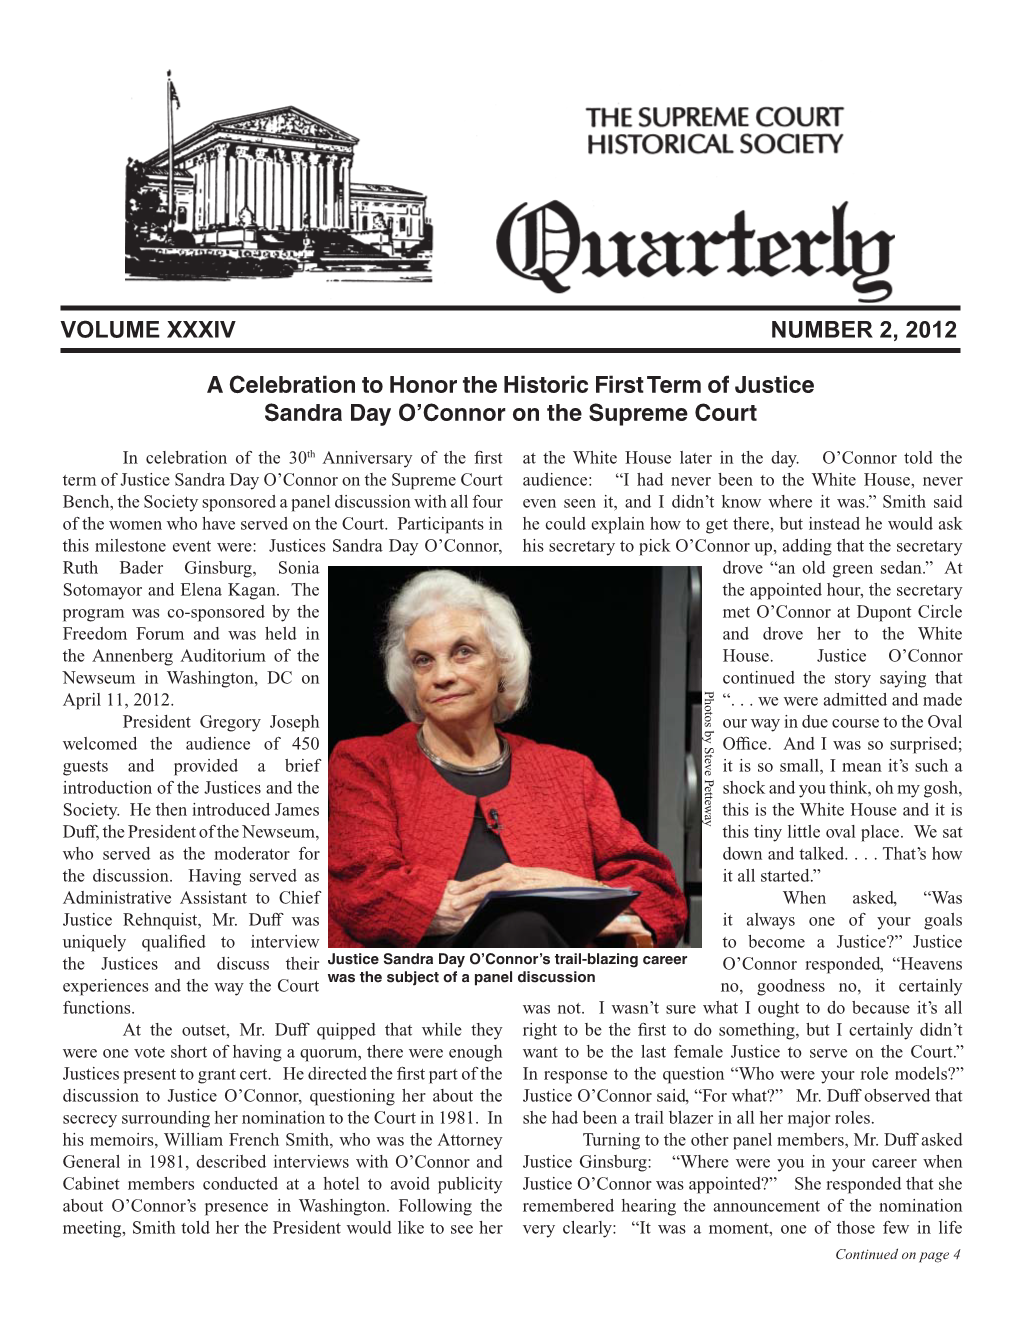 A Celebration to Honor the Historic First Term of Justice Sandra Day O’Connor on the Supreme Court